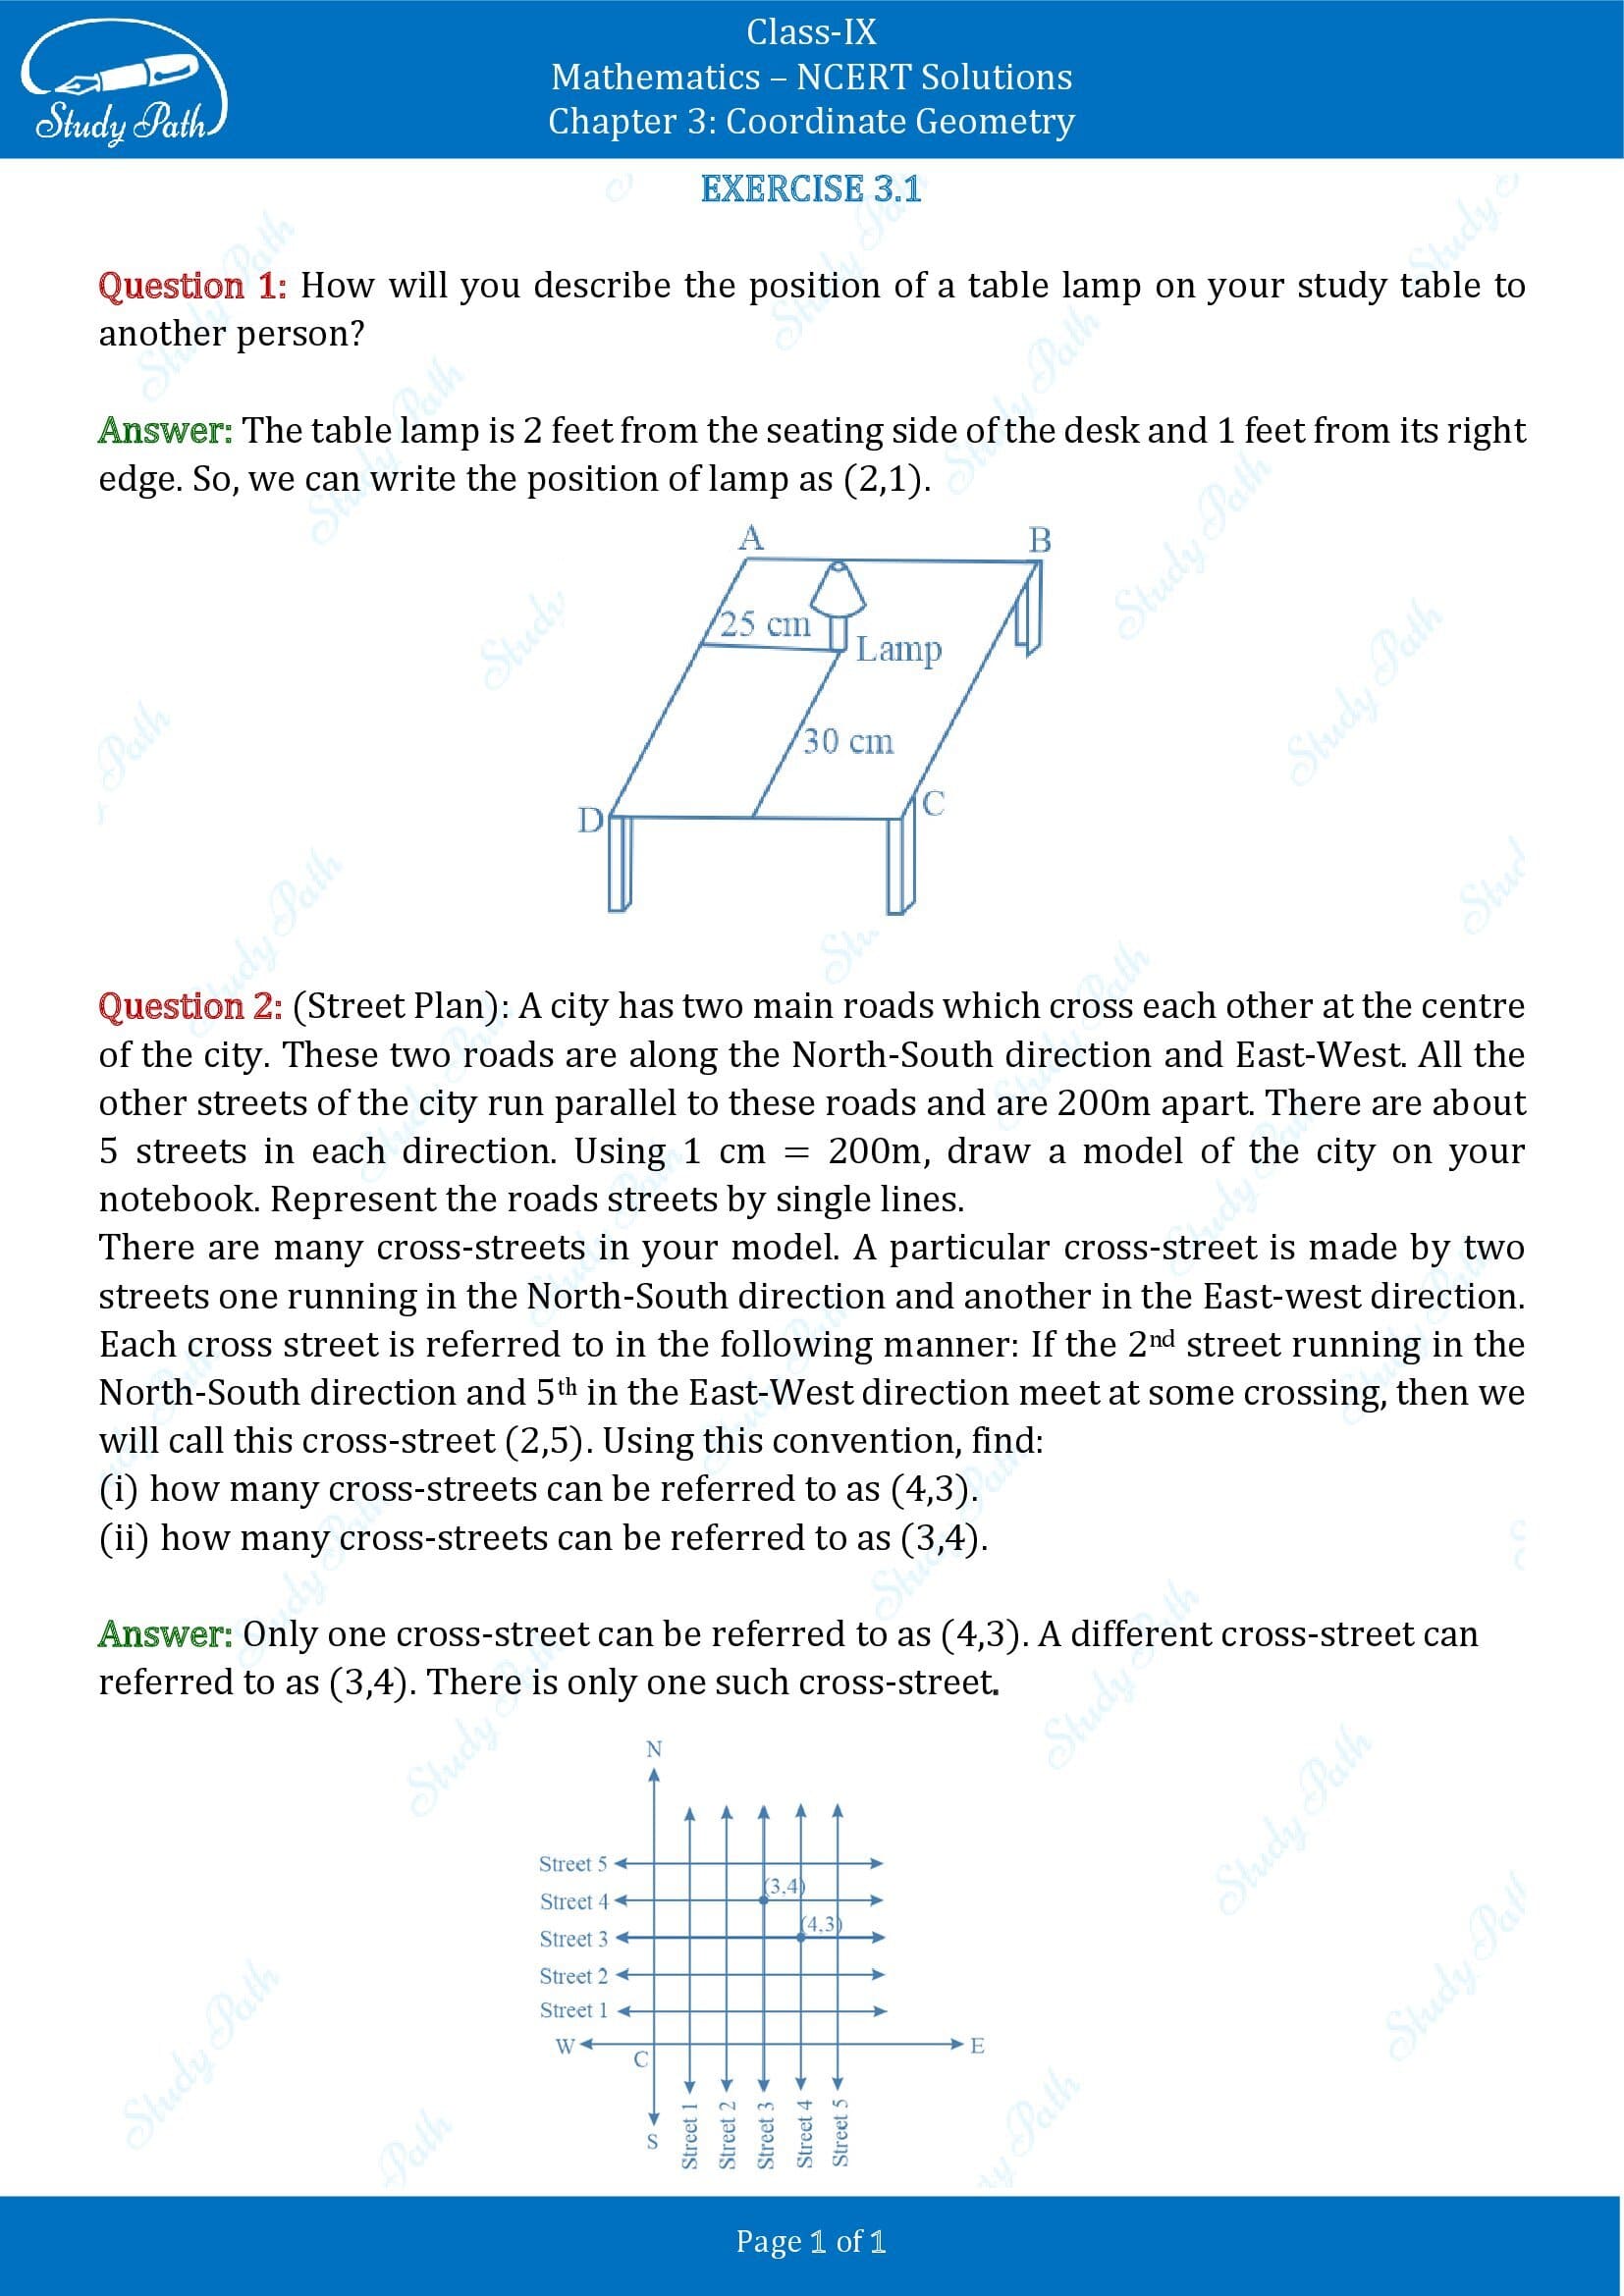 NCERT Solutions for Class 9 Maths Chapter 3 Corrdinate Geometry Exercise 3.1